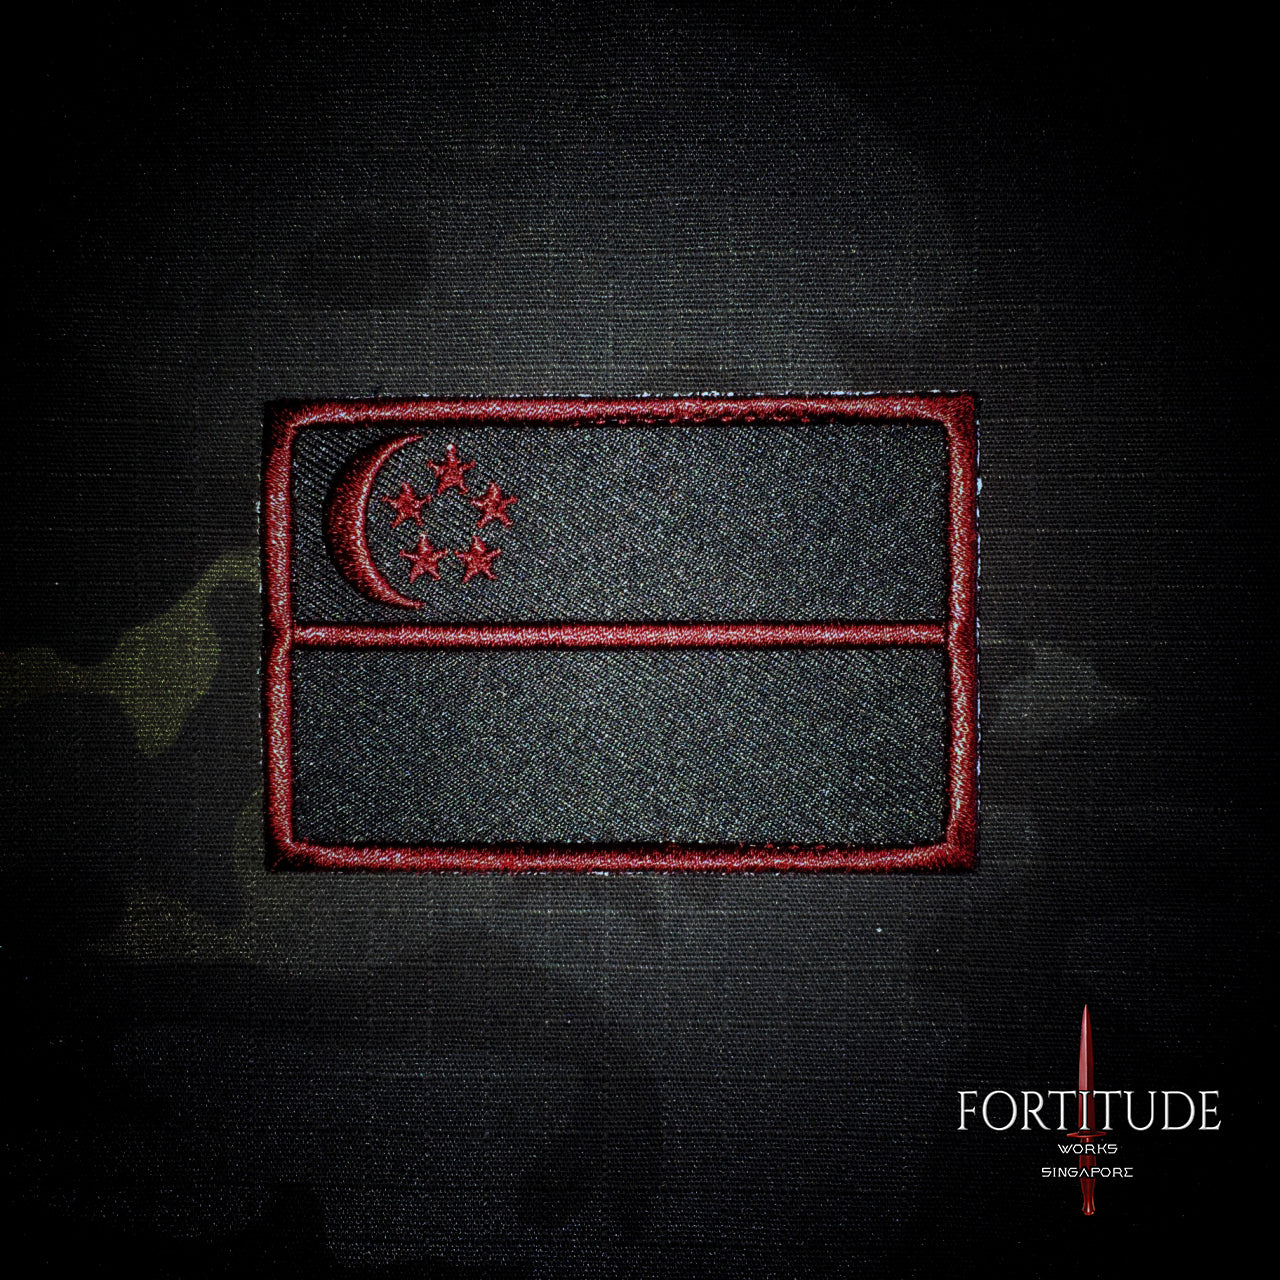 CRIMSON RED SG FLAG PATCH - FORTITUDE WORKS SINGAPORE